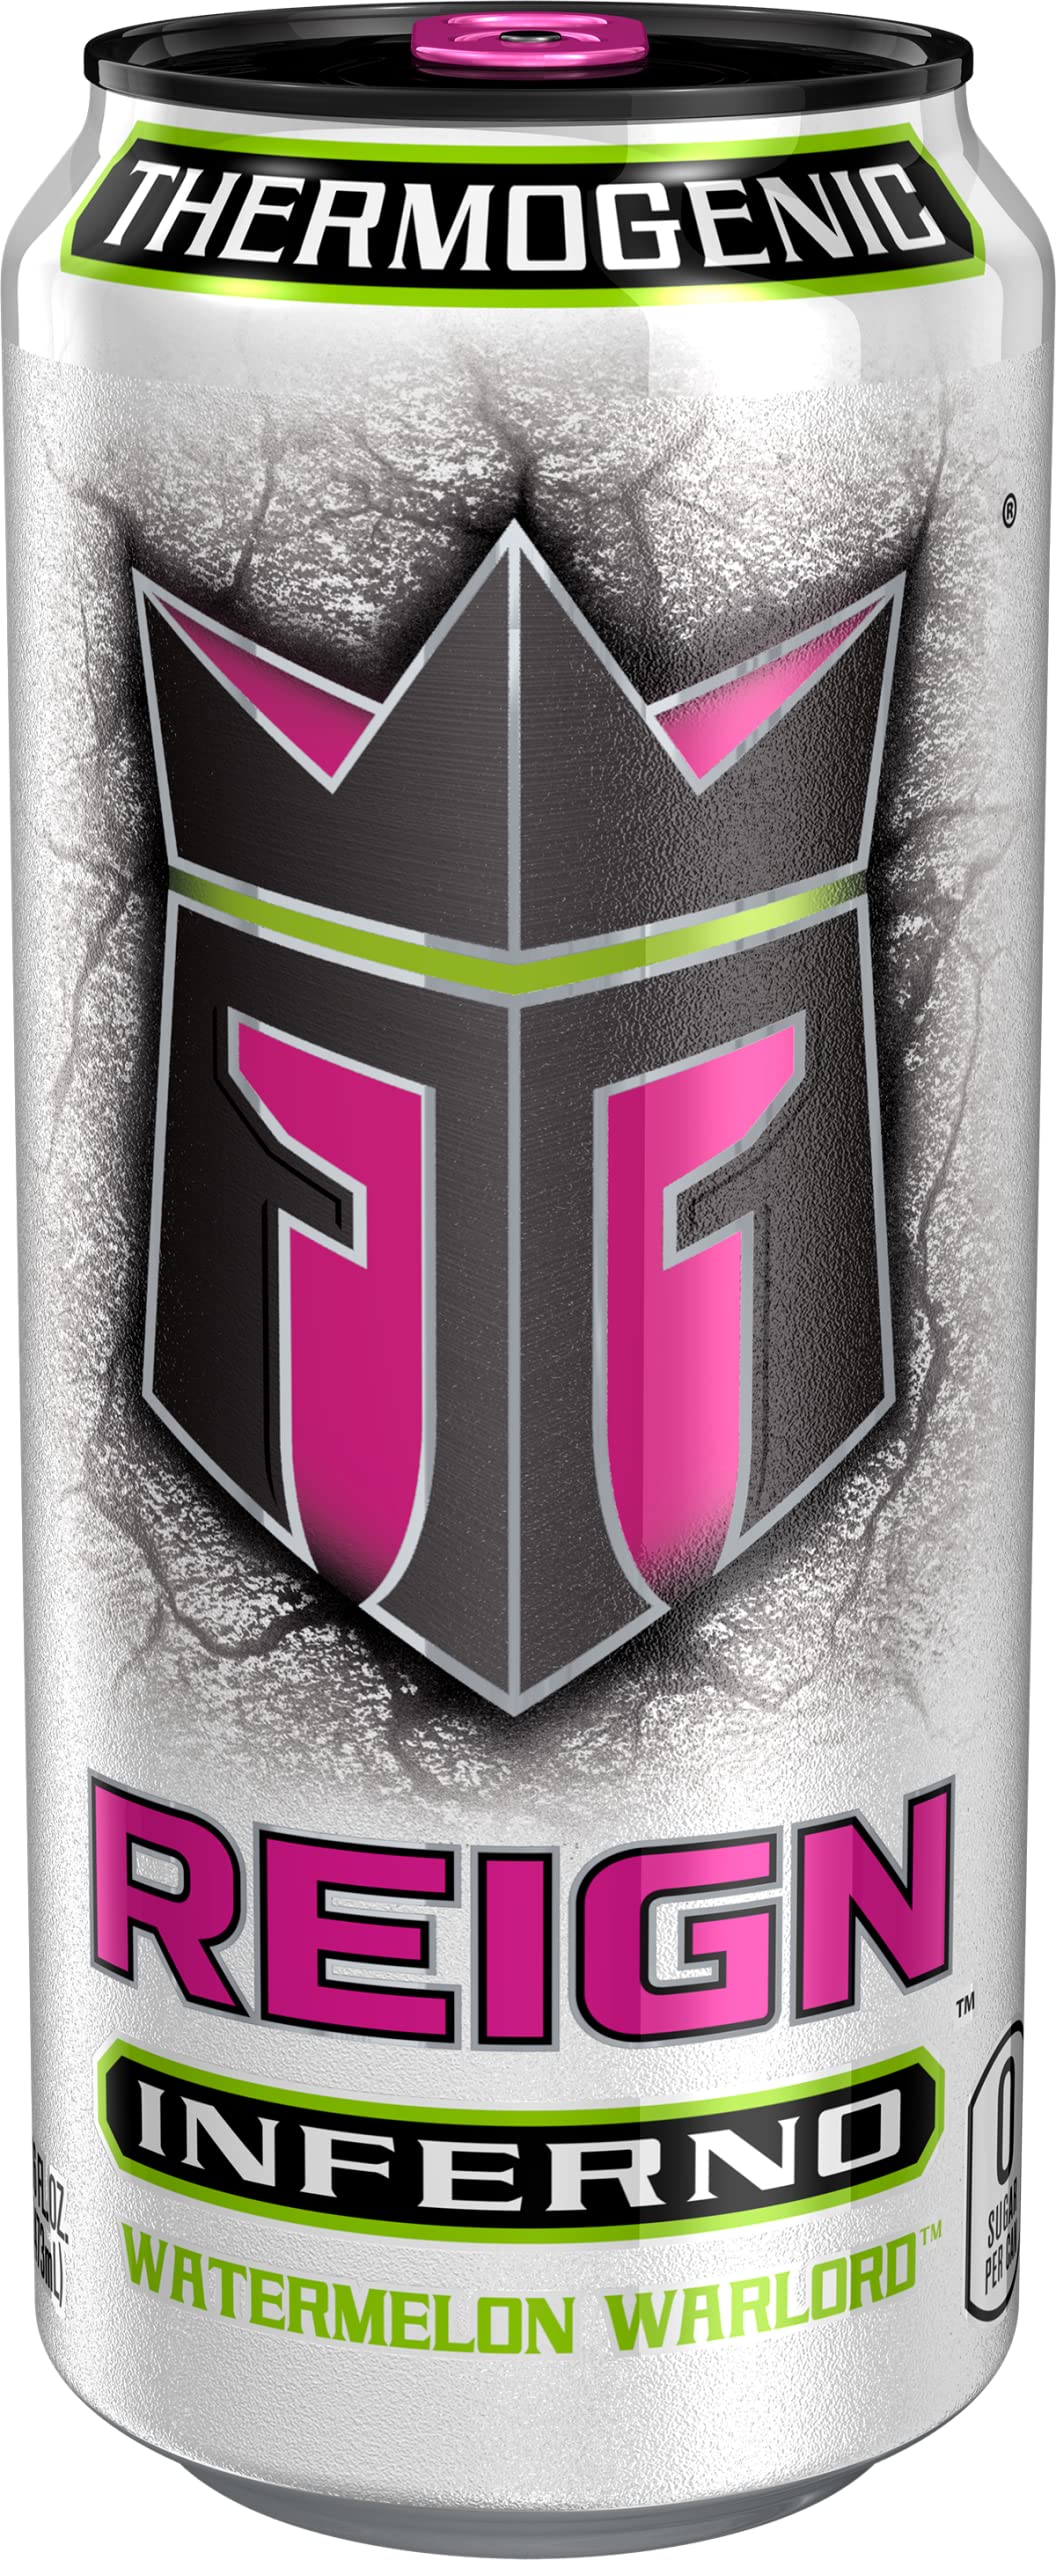 REIGN Inferno Watermelon Warlord, Thermogenic Fuel, Fitness and Performance Drink, 16 Fl Oz (Pack of 12)